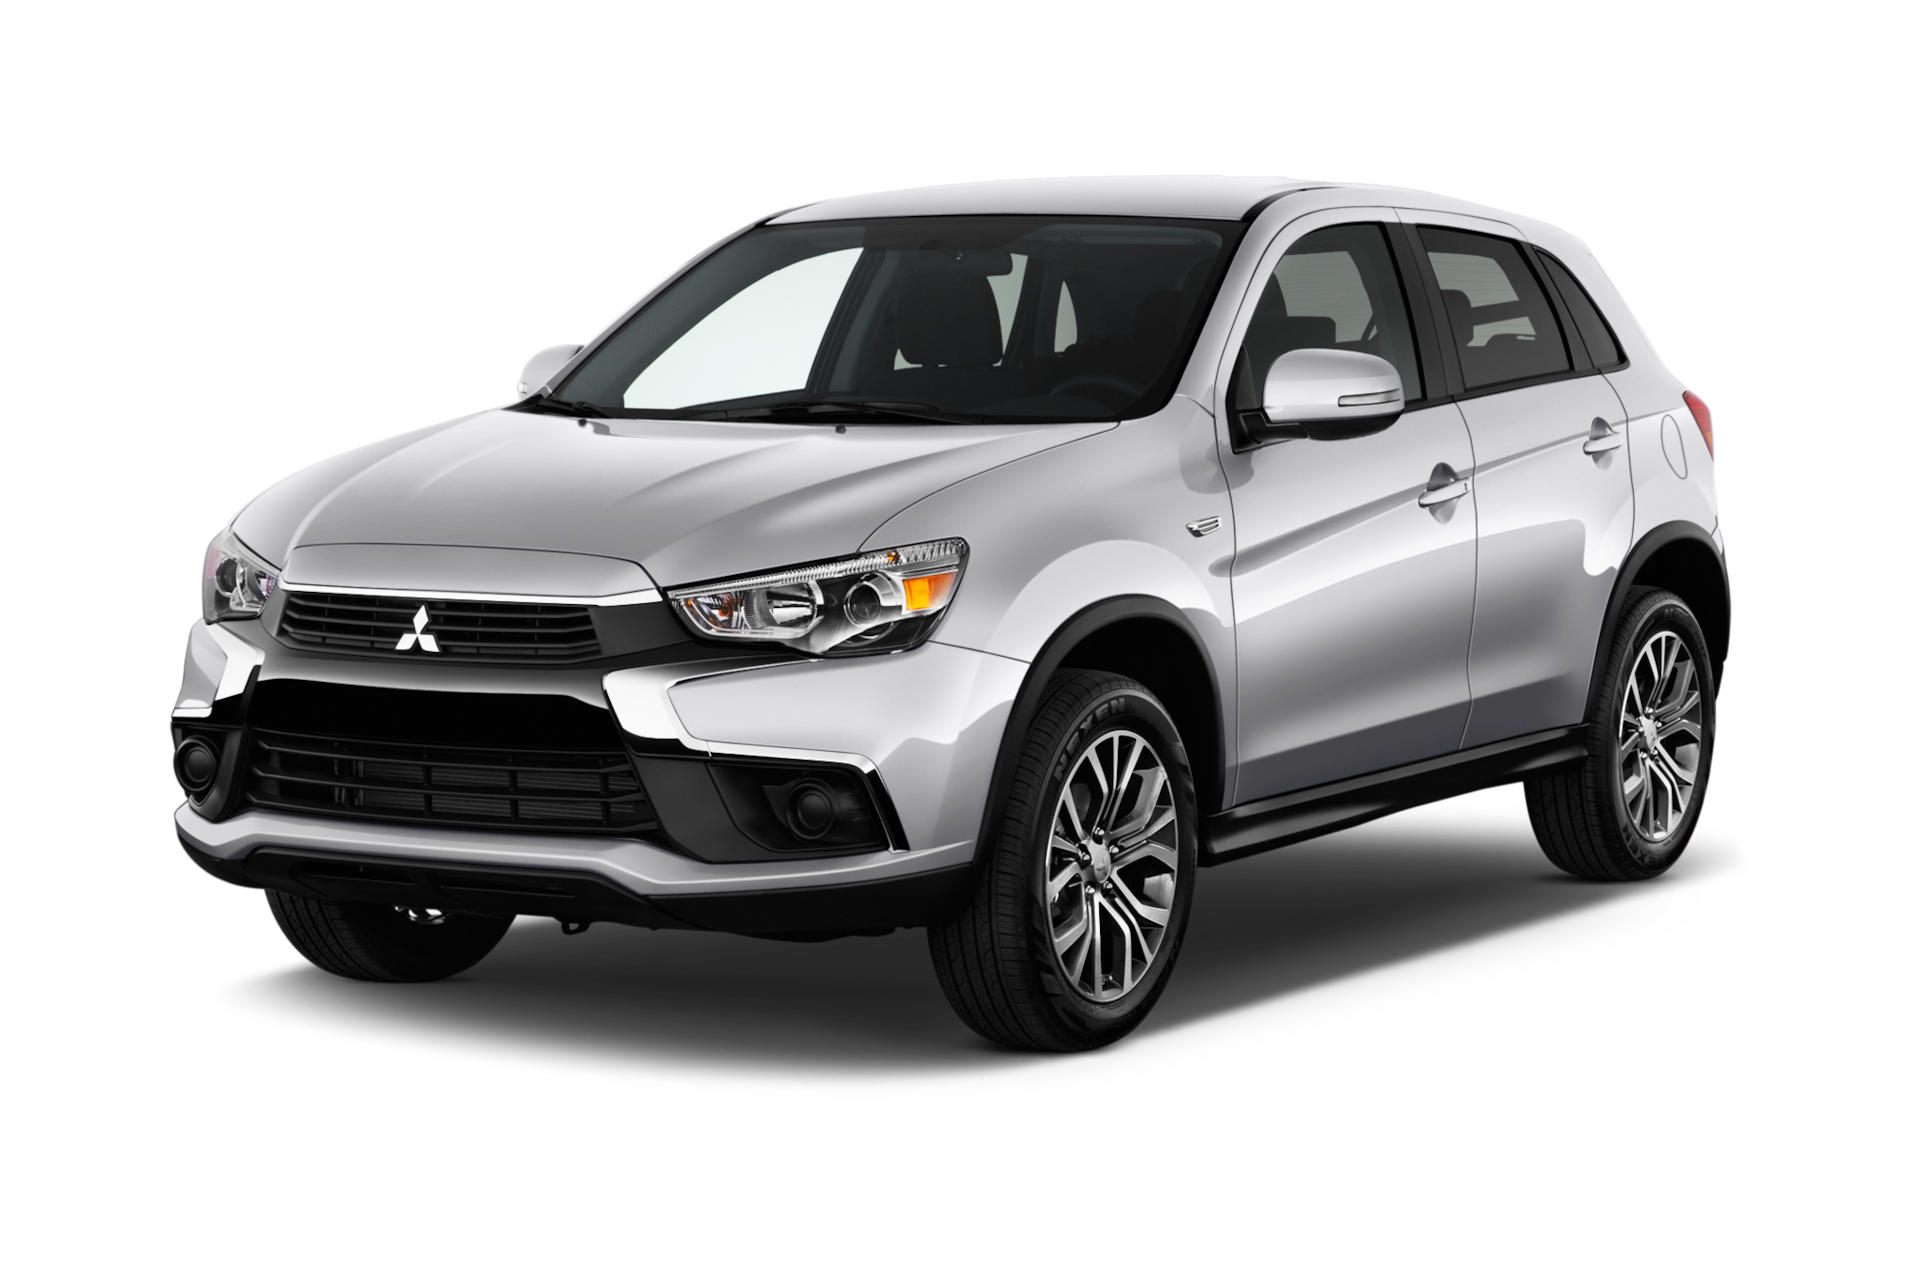 2017 Mitsubishi Outlander Sport Prices, Reviews, and Photos - MotorTrend